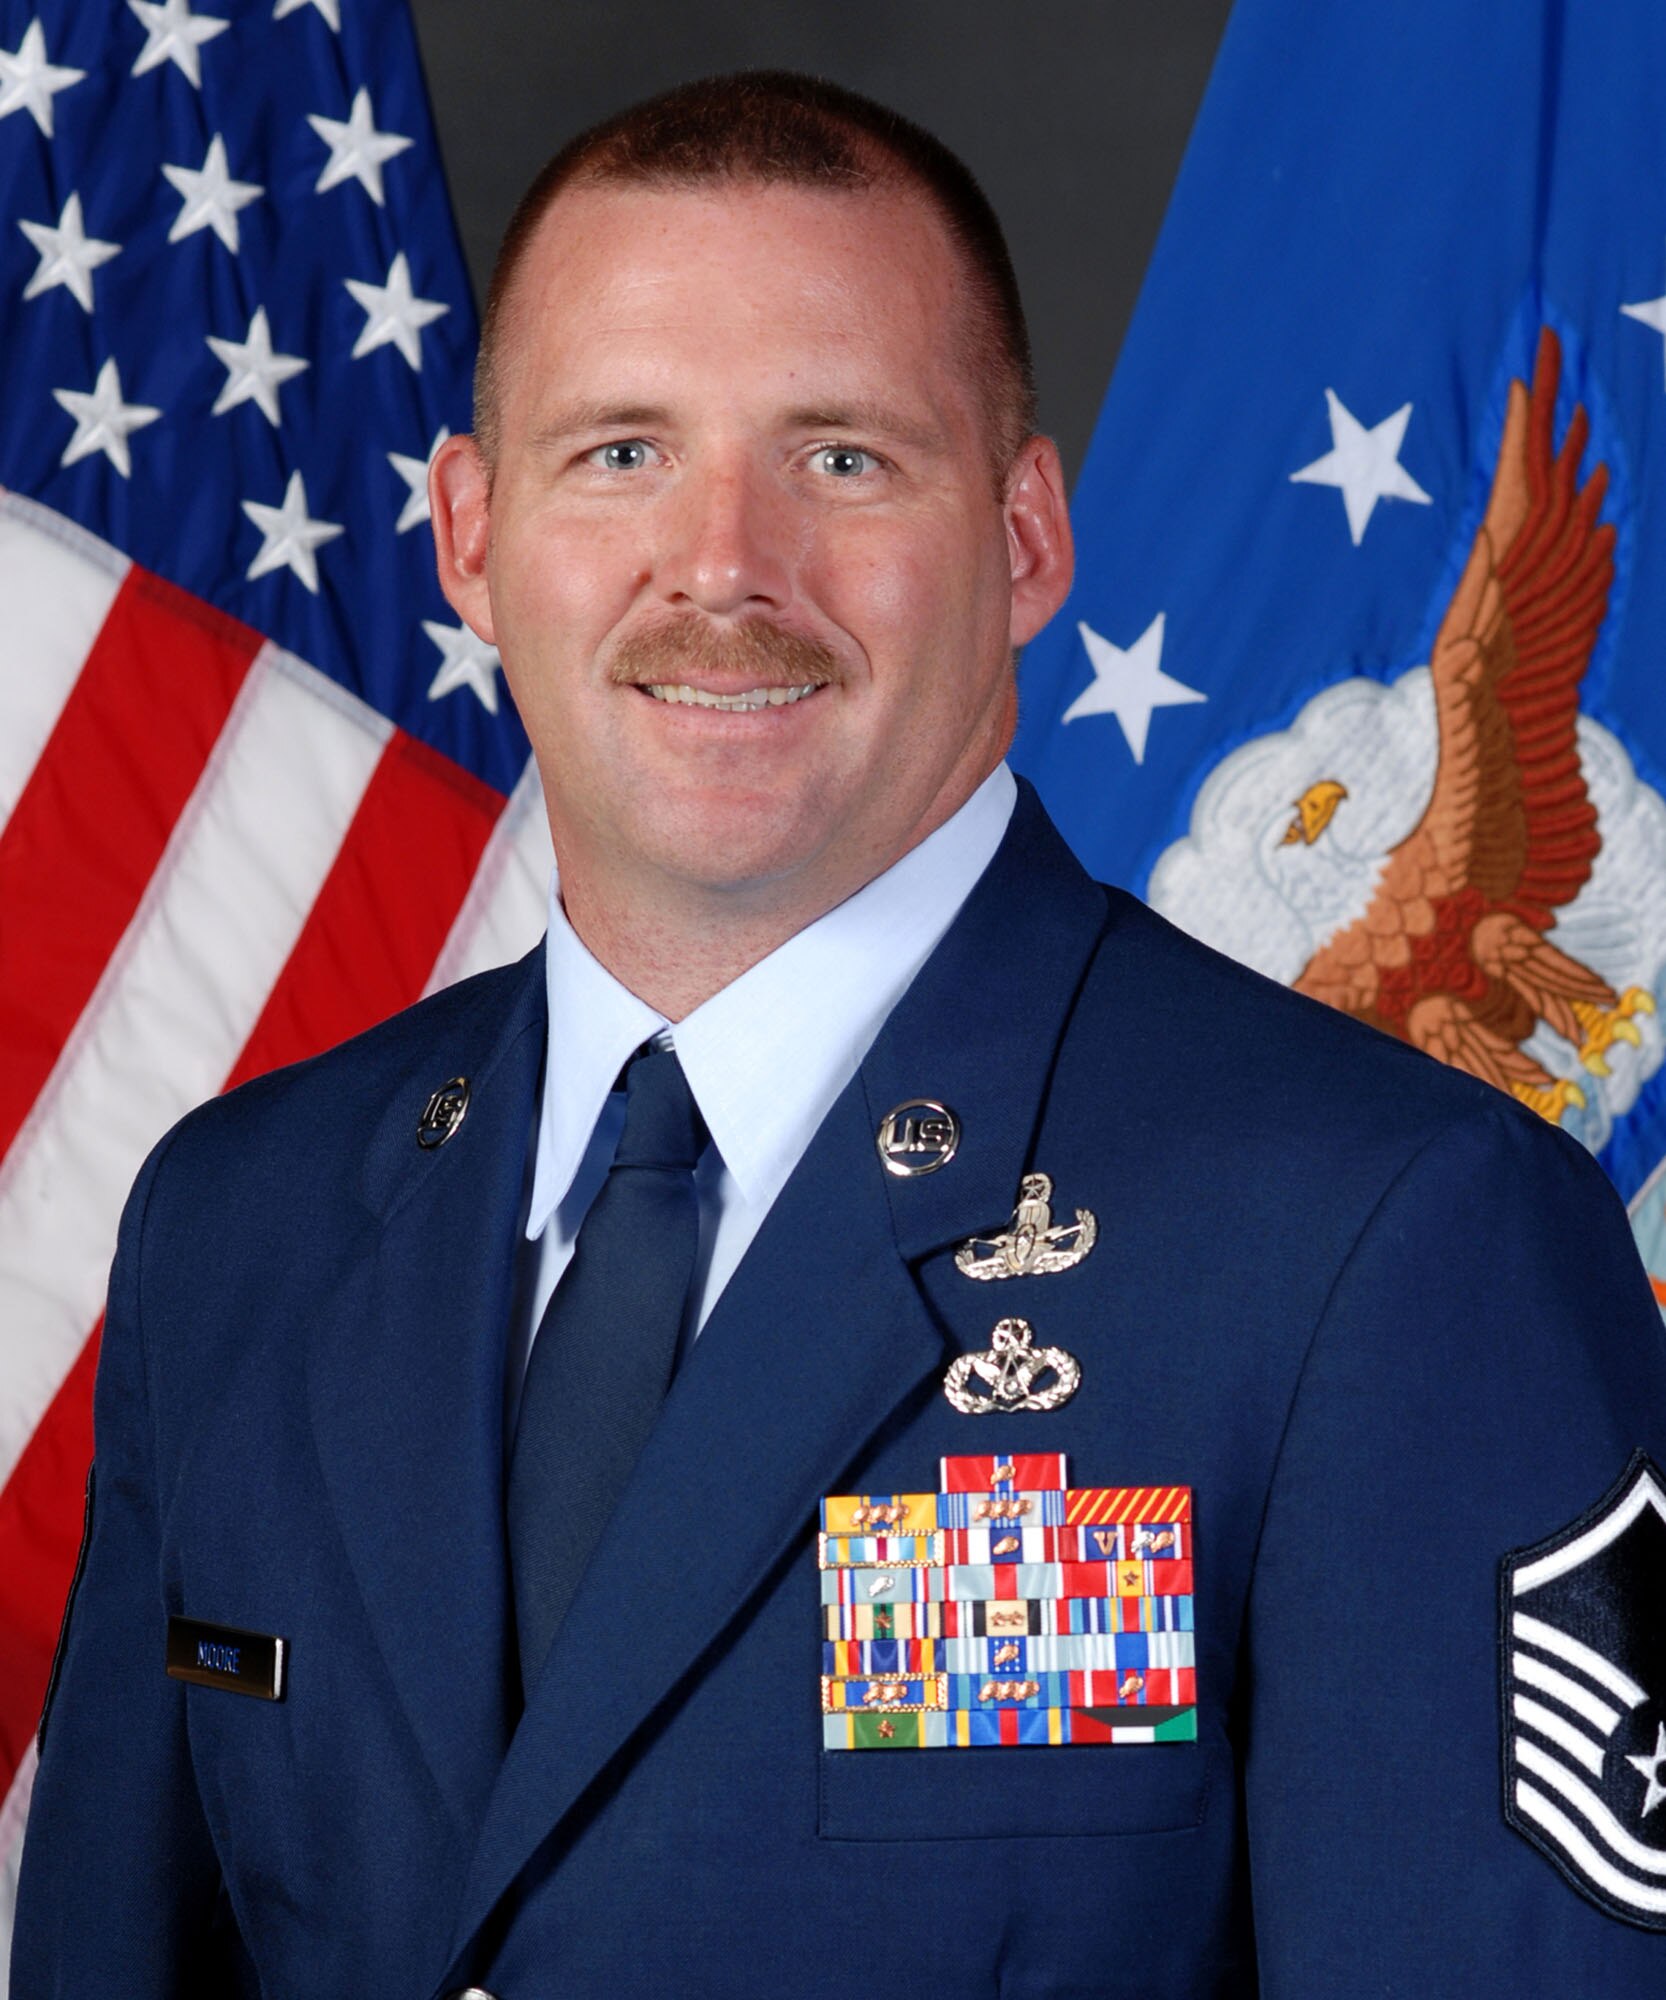 Master Sgt. Douglas Moore, 18th Civil Engineer Squadron superintendent of the Explosive Ordnance Disposal flight, is one of 16 Airmen featured in the current volume of Portraits in Courage.
(U.S. Air Force photo/Junko Kinjo)